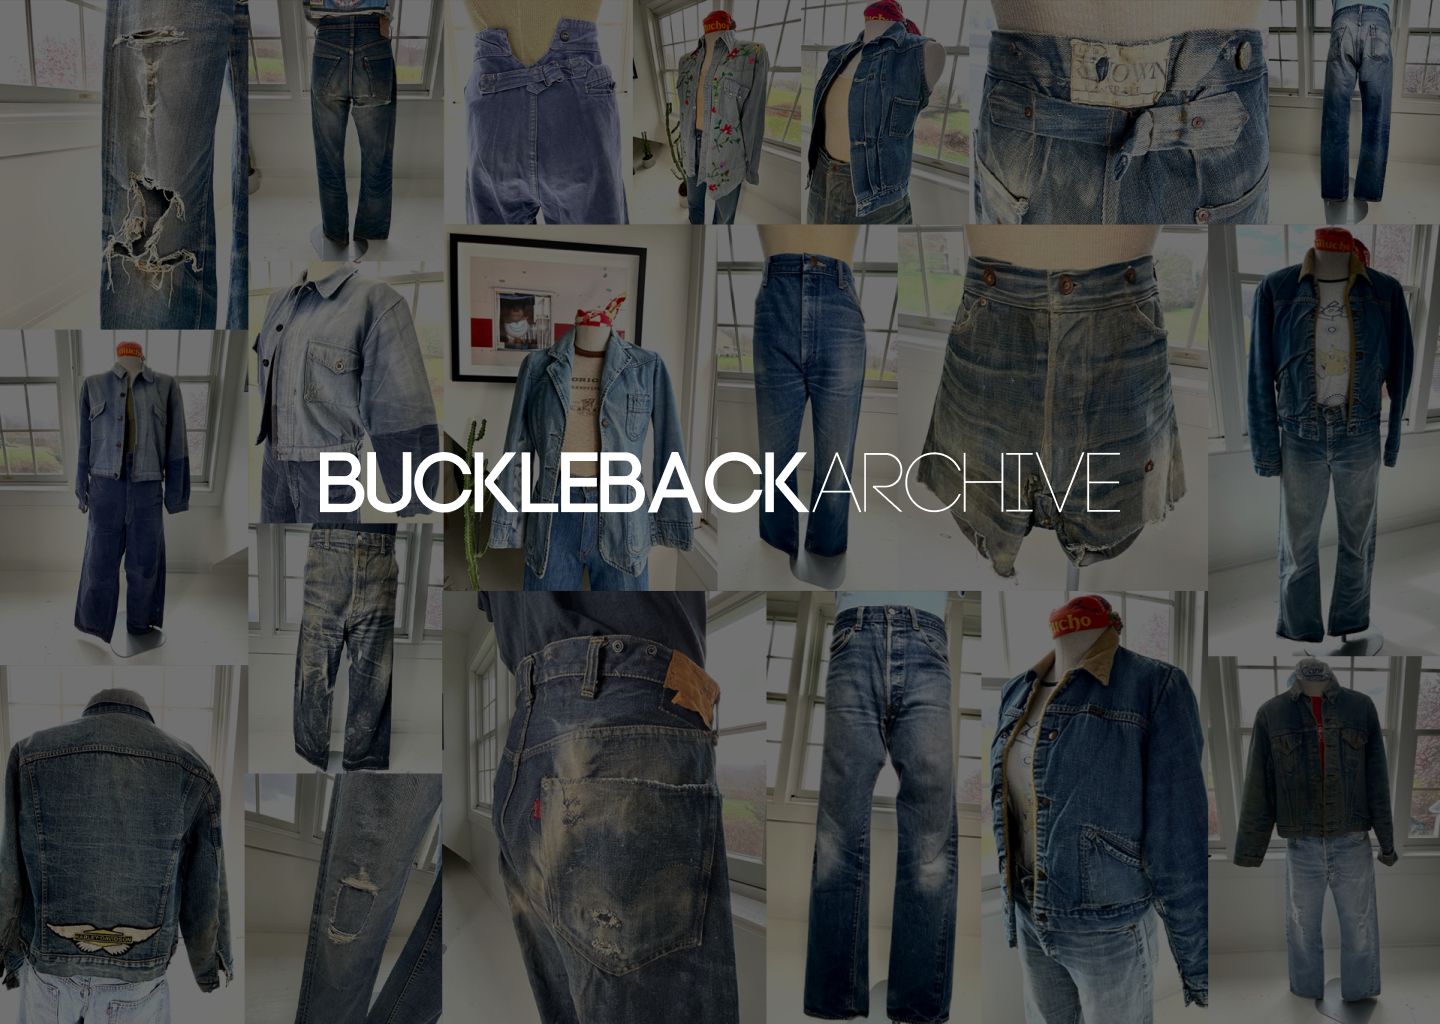 Buckleback Archive  Vintage items circa 1870 - 2000 are available –  BuckleBack Archive